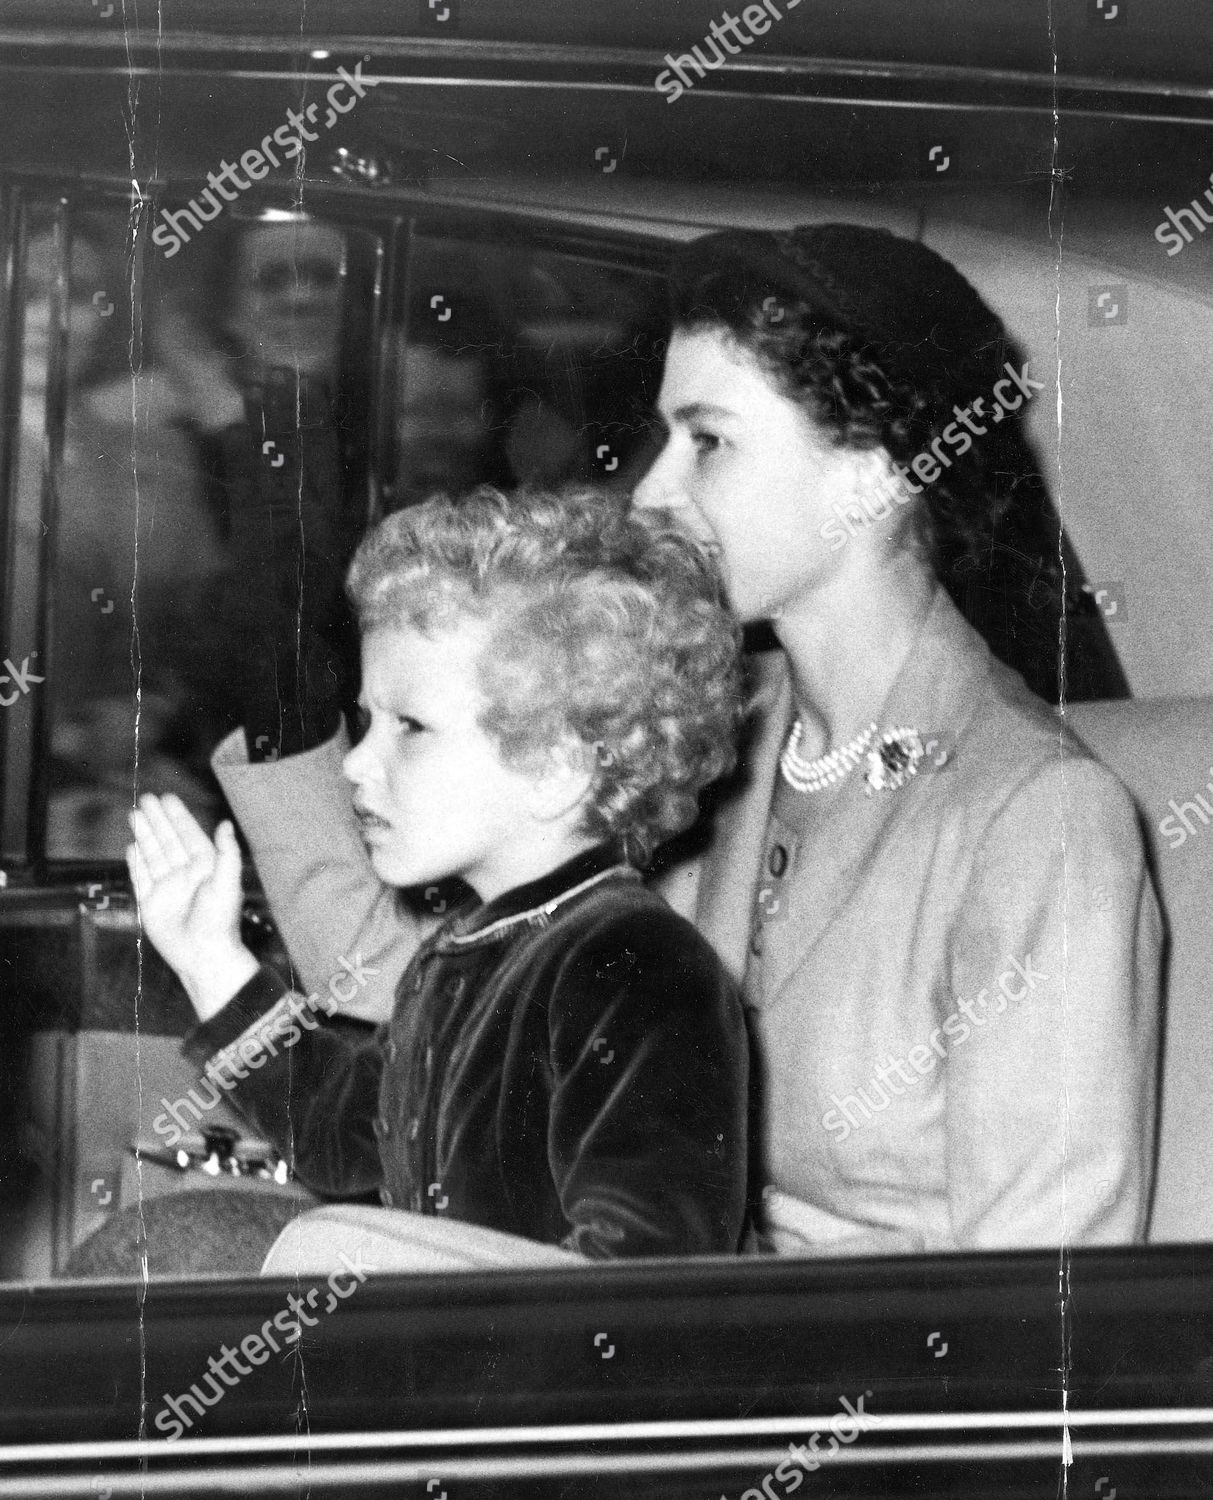 the-queen-elizabeth-ii-smiles-princess-anne-princess-royal-waves-as-they-leave-buckingham-palace-by-car-last-night-for-euston-station-and-the-holiday-journey-to-scotland-1954-shutterstock-editorial-888333a.jpg